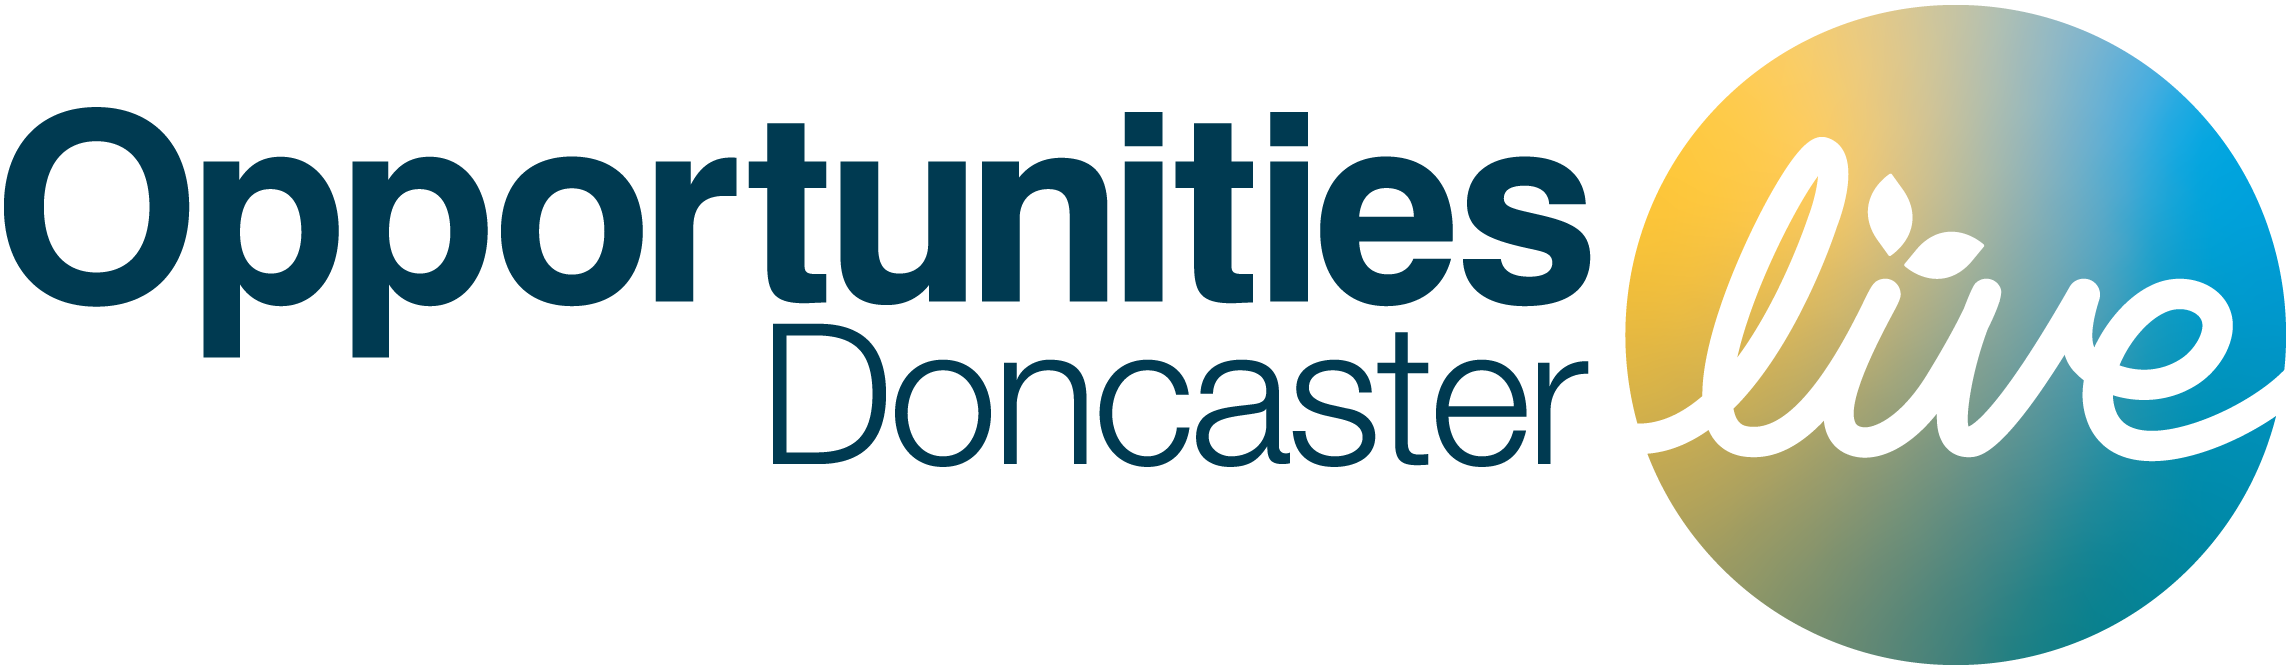 Doncaster Chambers Opportunities Doncaster Live